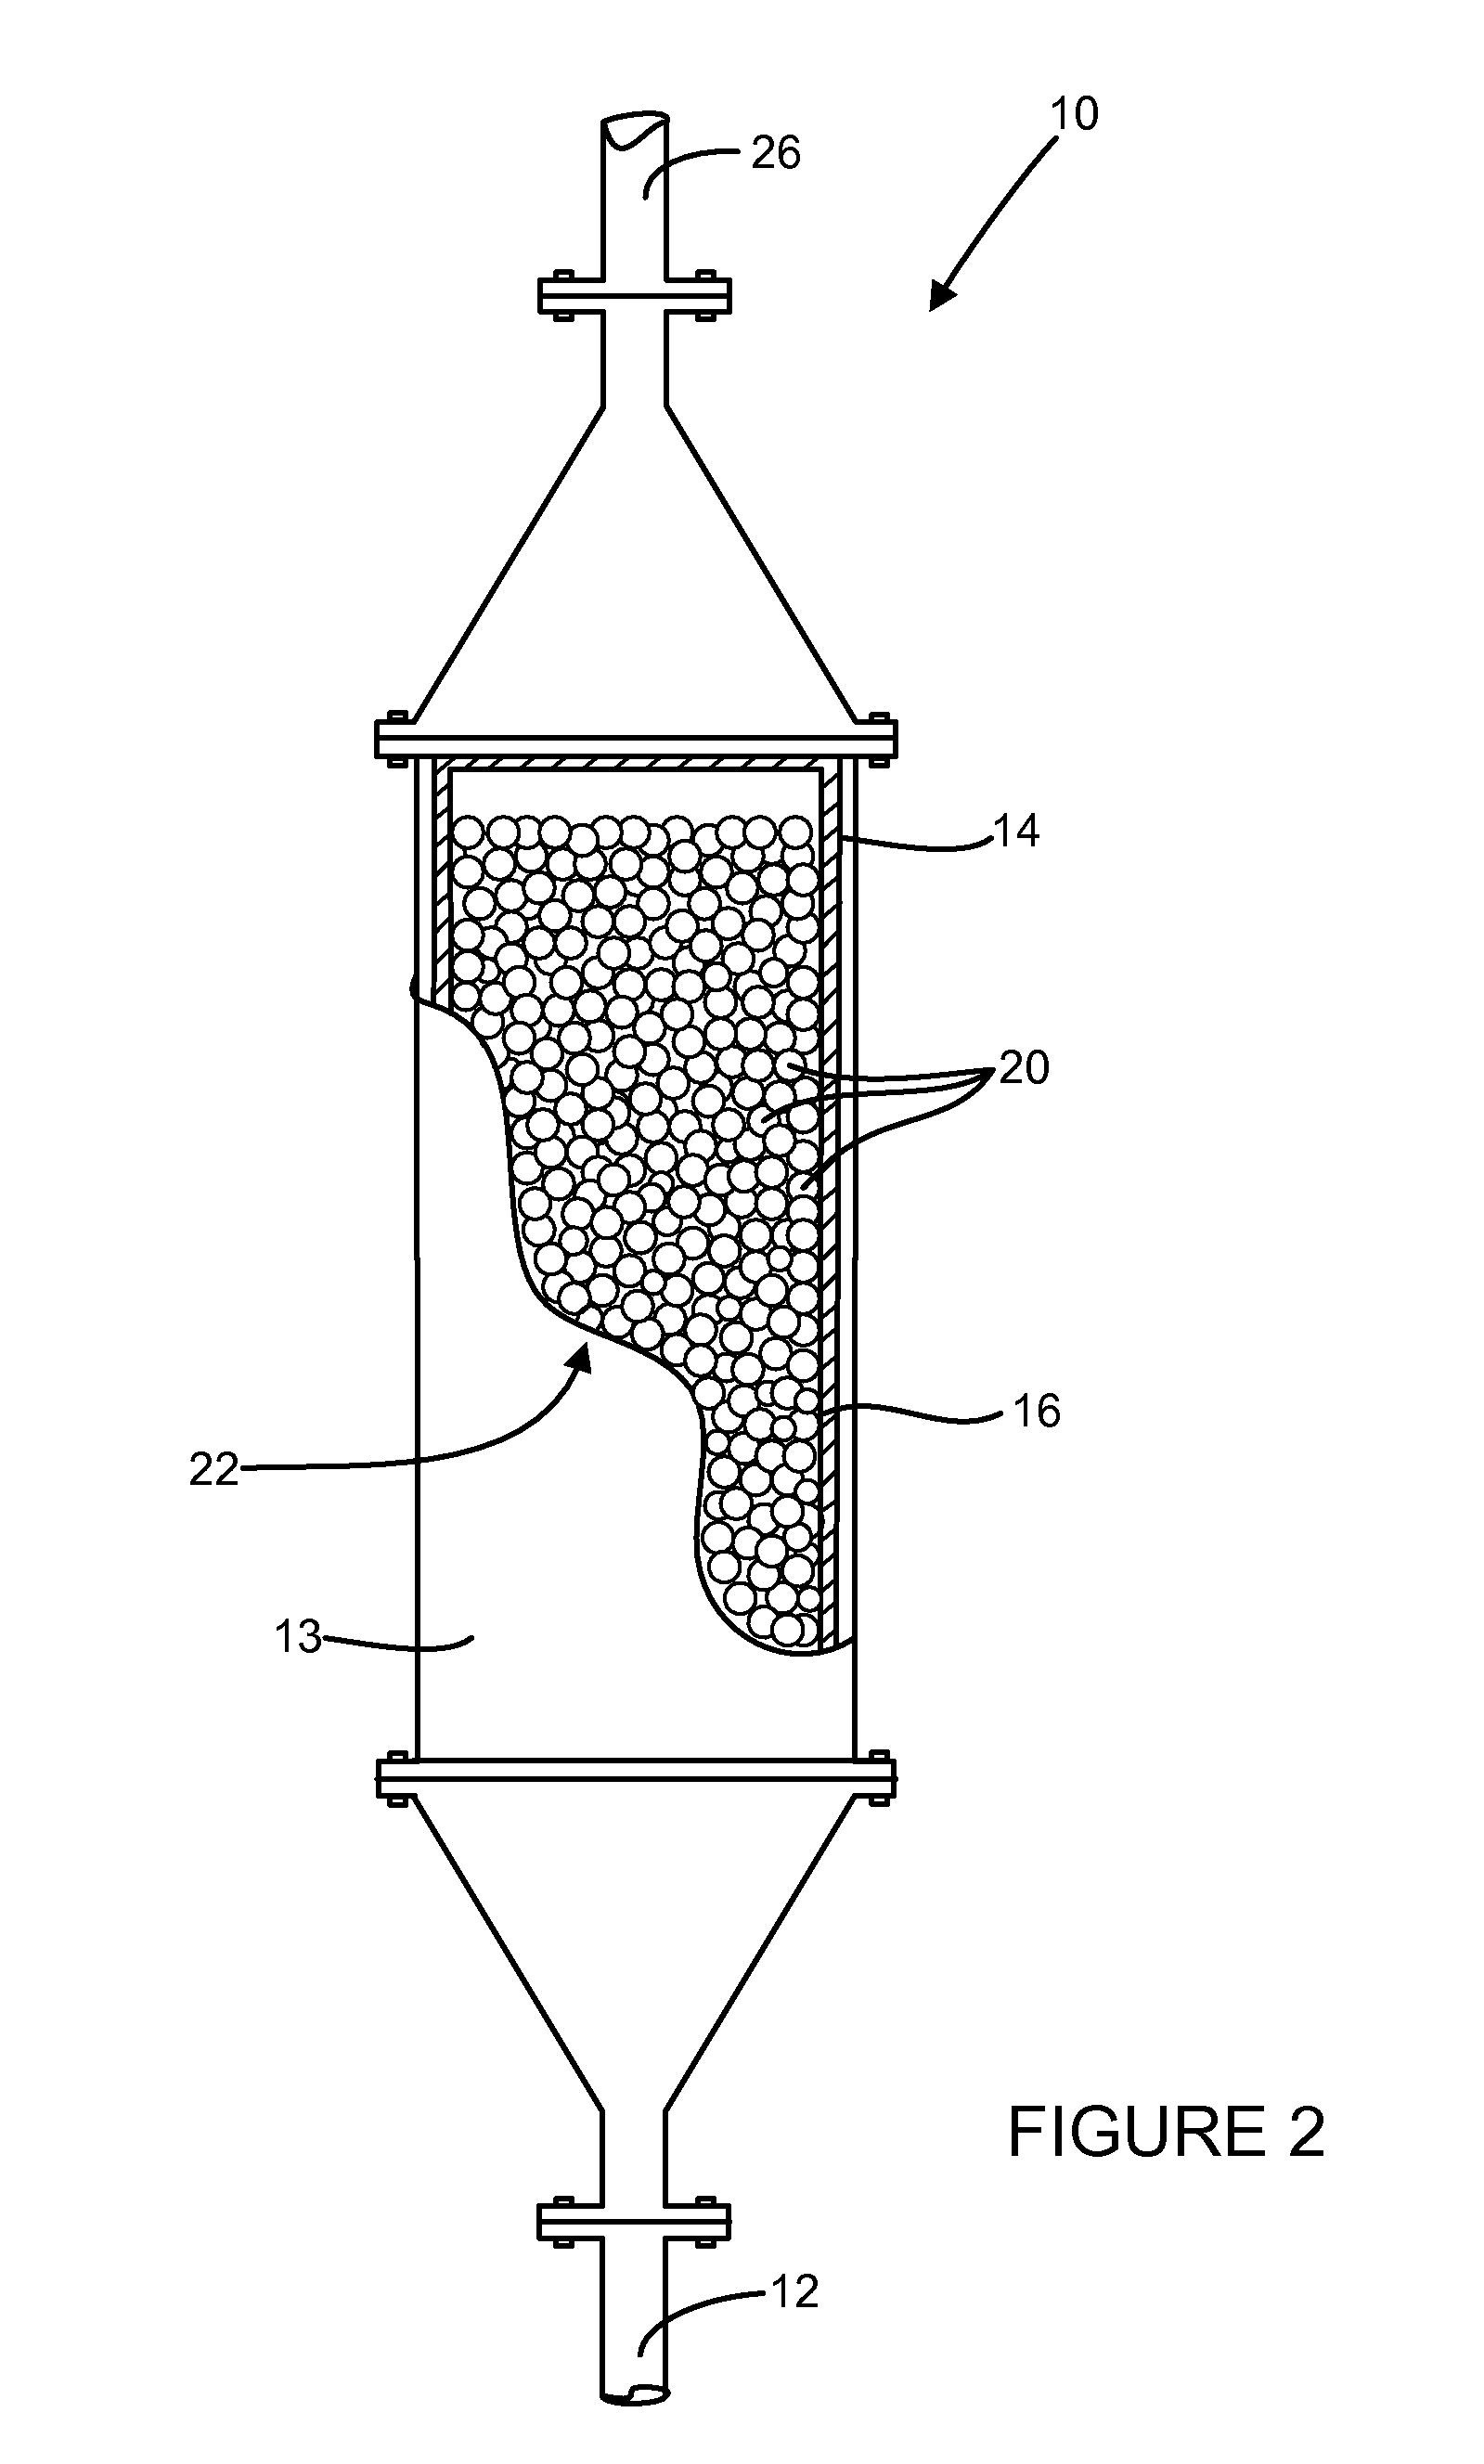 Methods and devices for reducing hazardous air pollutants